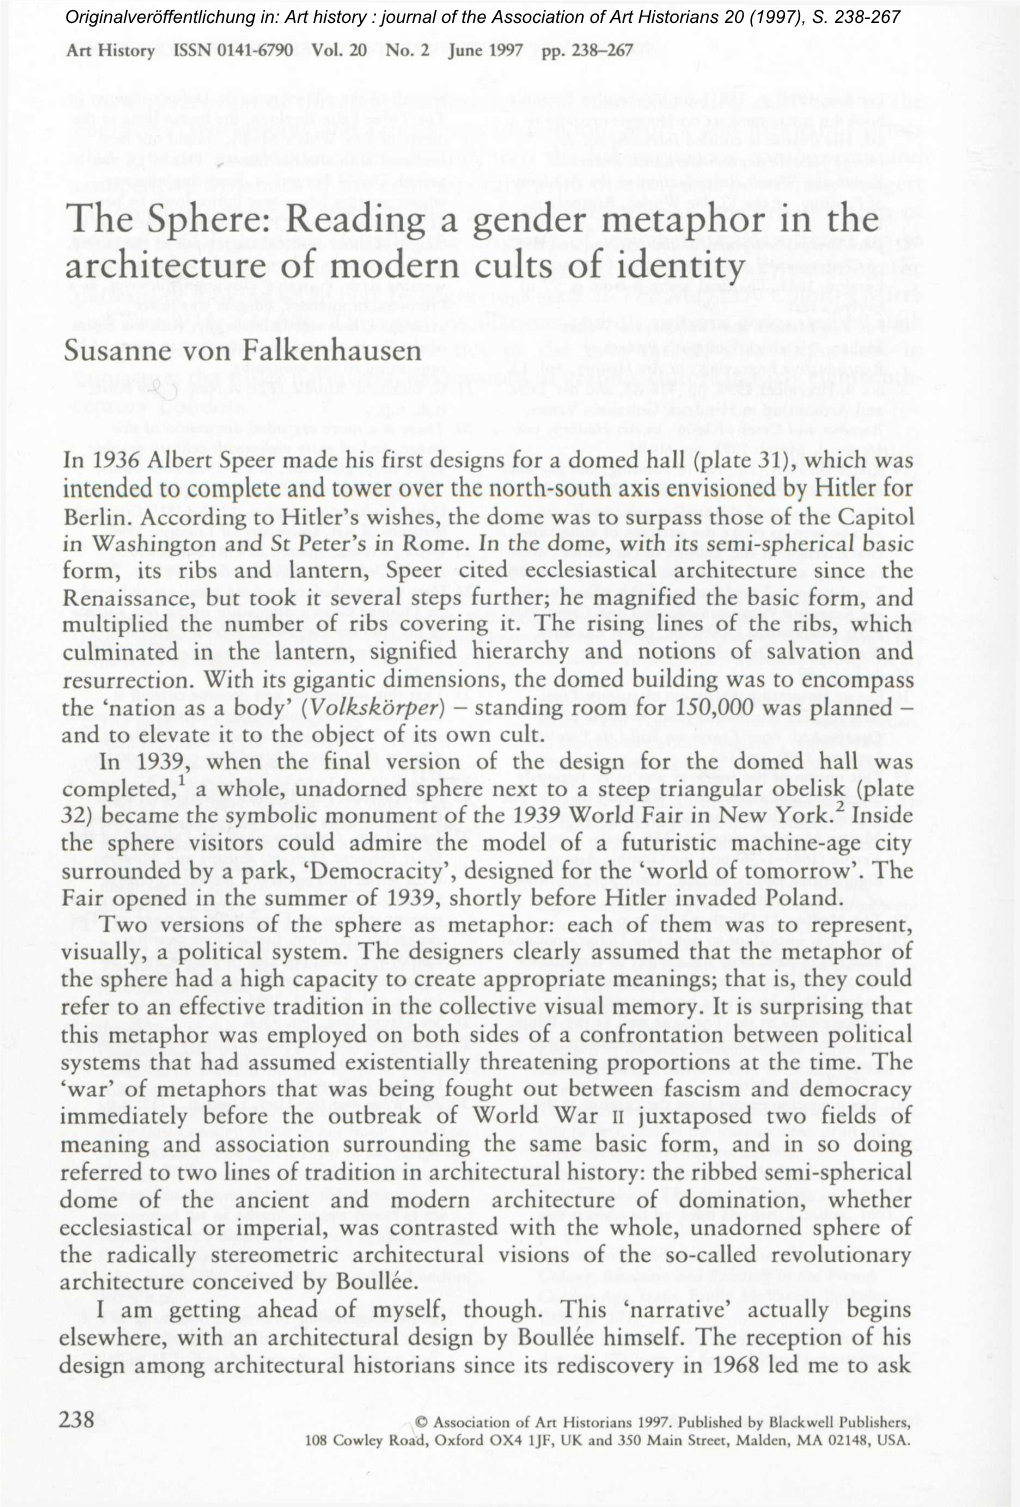 The Sphere: Reading a Gender Metaphor in the Architecture of Modern Cults of Identity